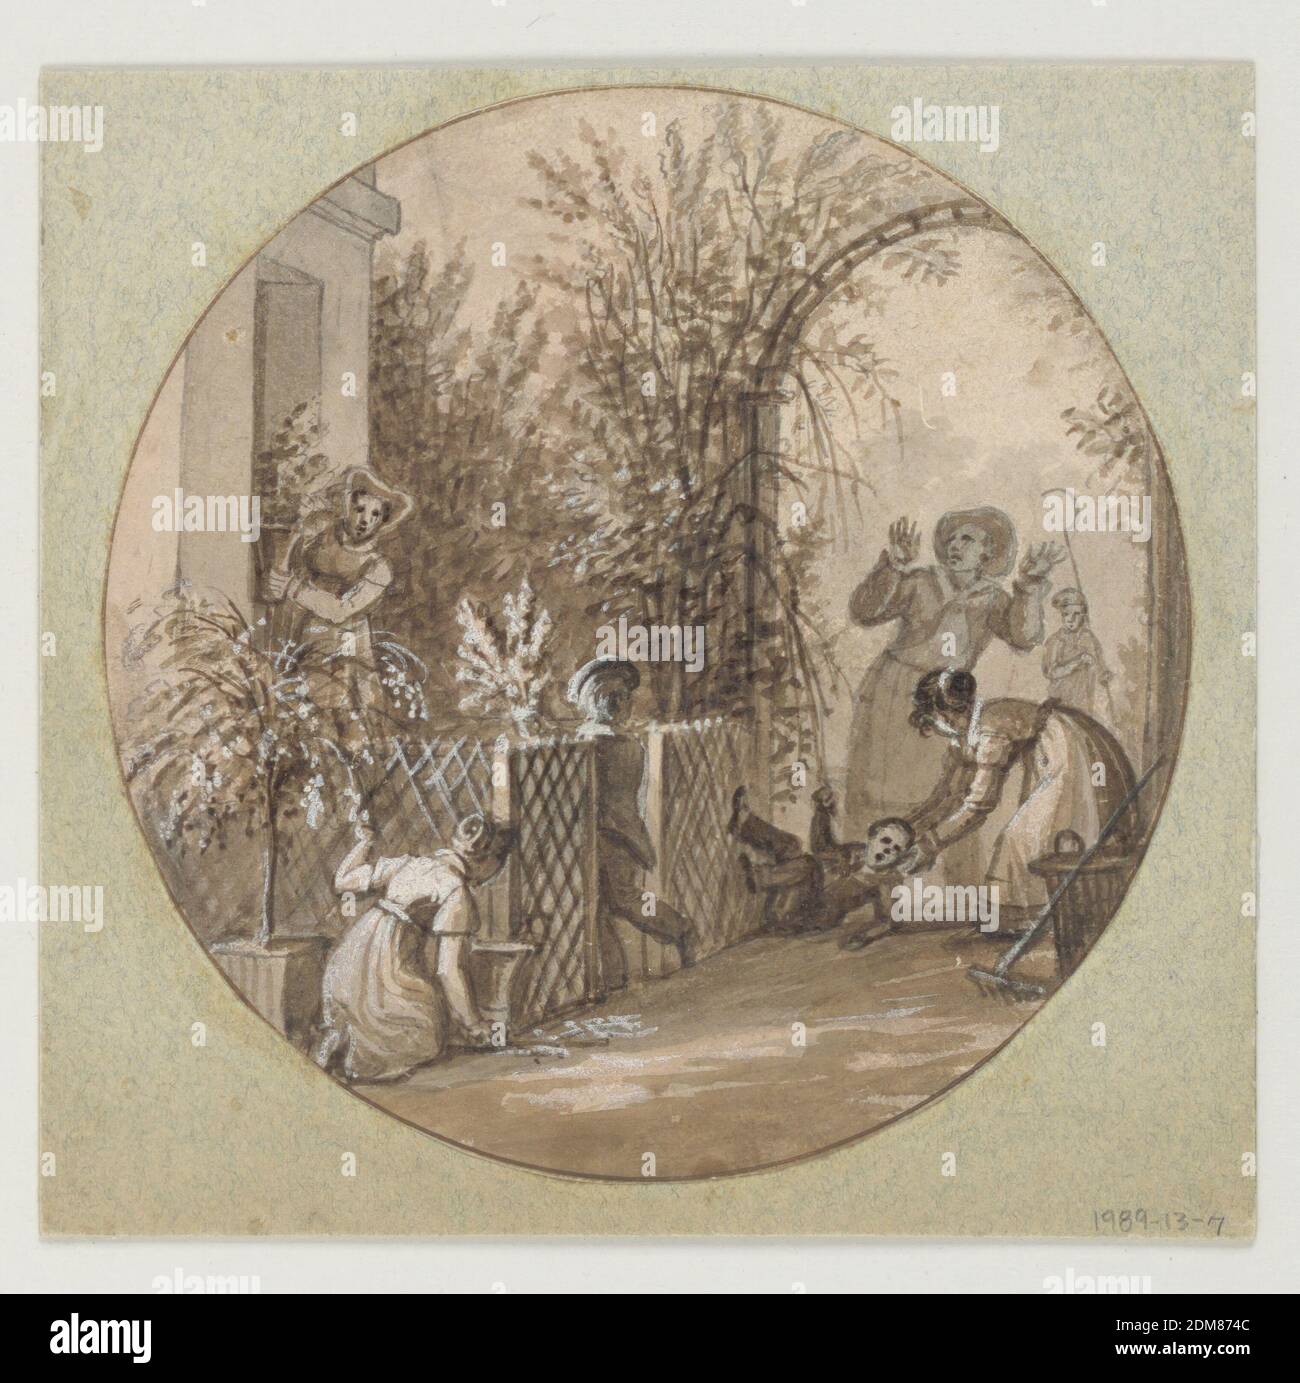 Design for a Painted Porcelain Plate, Garden Scene from the Service de la Culture des Fleurs (Flower Cultivation Service), Jean Charles Develly, French, 1783 - 1849, Pen and brown, black ink, brush and brown, black wash, white gouache, red crayon, graphite on tan paper mounted on blue-gray paper, Design for a painted porcelain plate, rondel. A garden setting with an arbor full of trees, right middleground, and a trellised fence around a house/garden building, left foreground. A figure of a kneeling woman assists a young boy who has falllen to the ground. Behind them, a gardener raises his arms Stock Photo